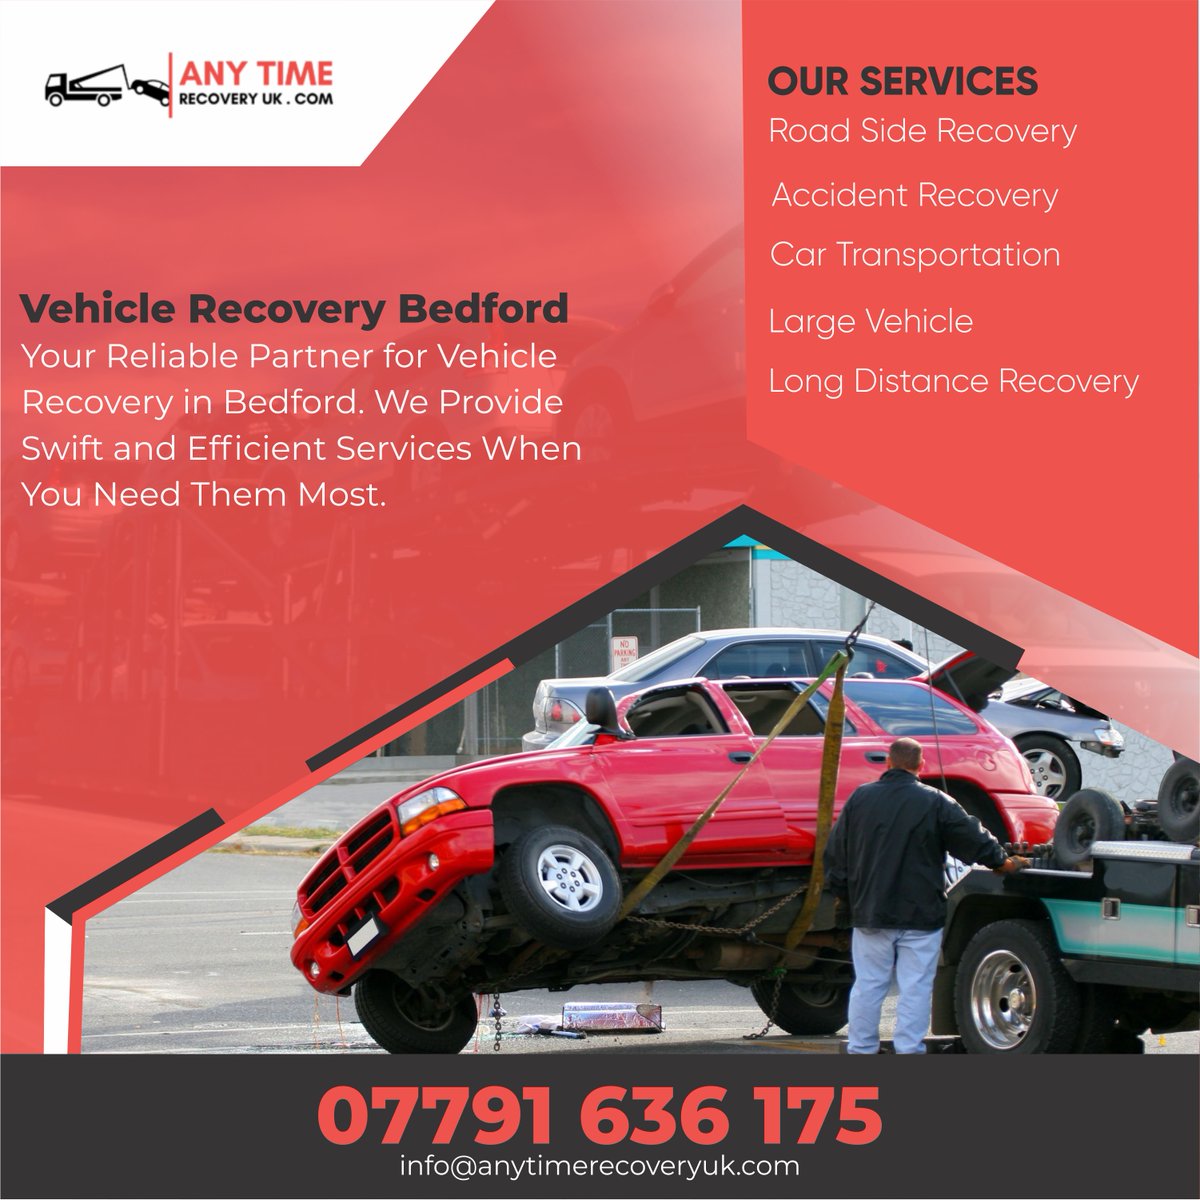 'Your reliable partner for vehicle recovery in Bedford, United Kingdom. We provide swift and efficient assistance whenever you need it.'  

anytimerecoveryuk.com
#VehicleRecoveryBedford
#BedfordTowing
#EmergencyRecovery
#CarRescue
#RoadsideAssistance